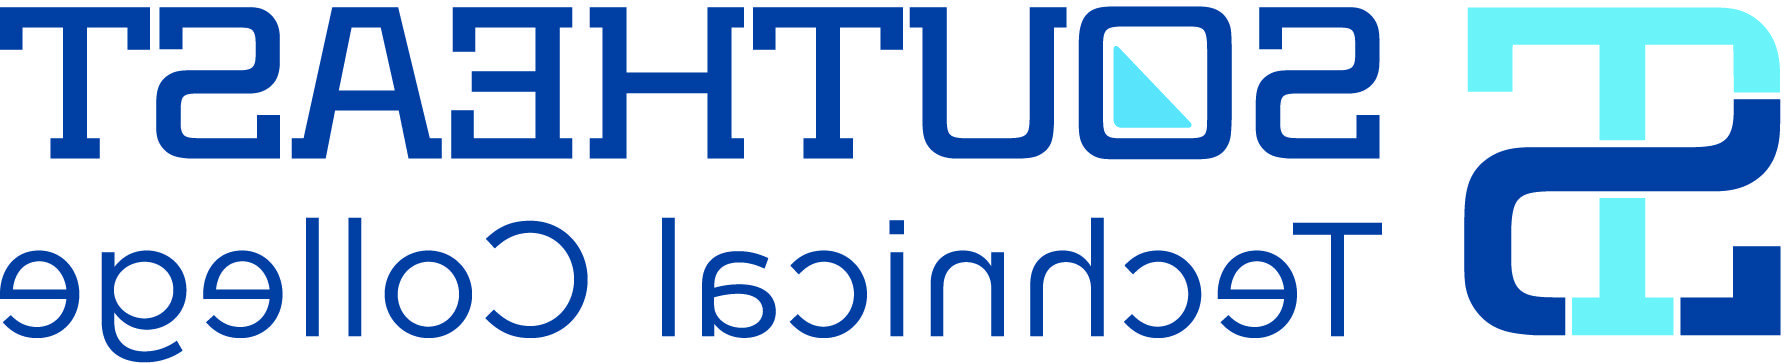 Southeast Technical College logo and monogram